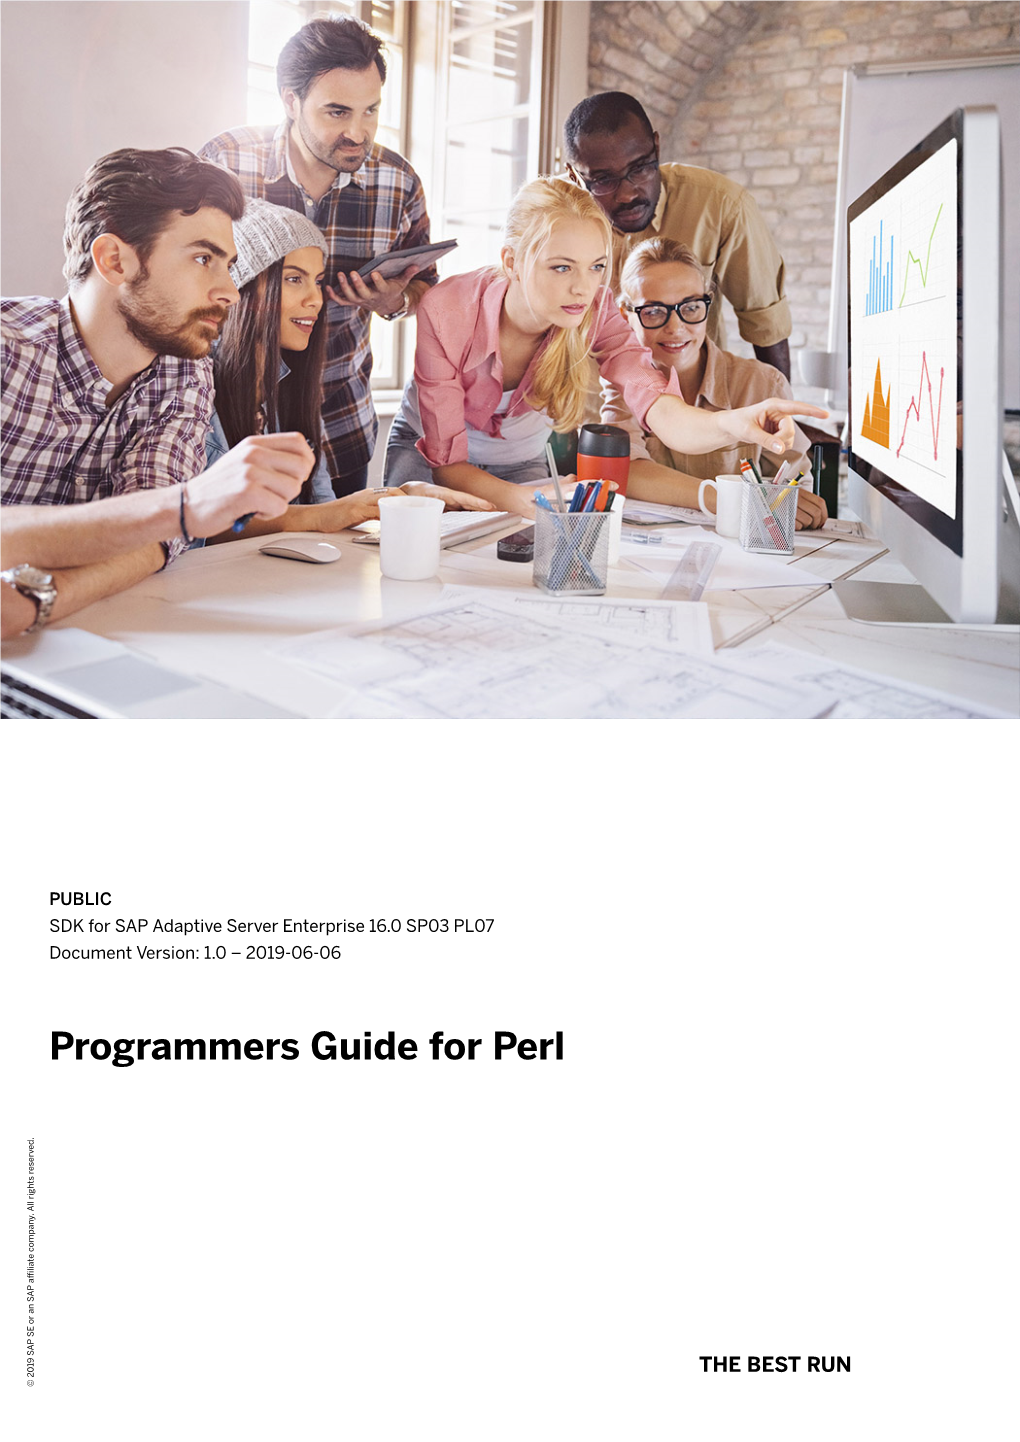 Programmers Guide for Perl Company